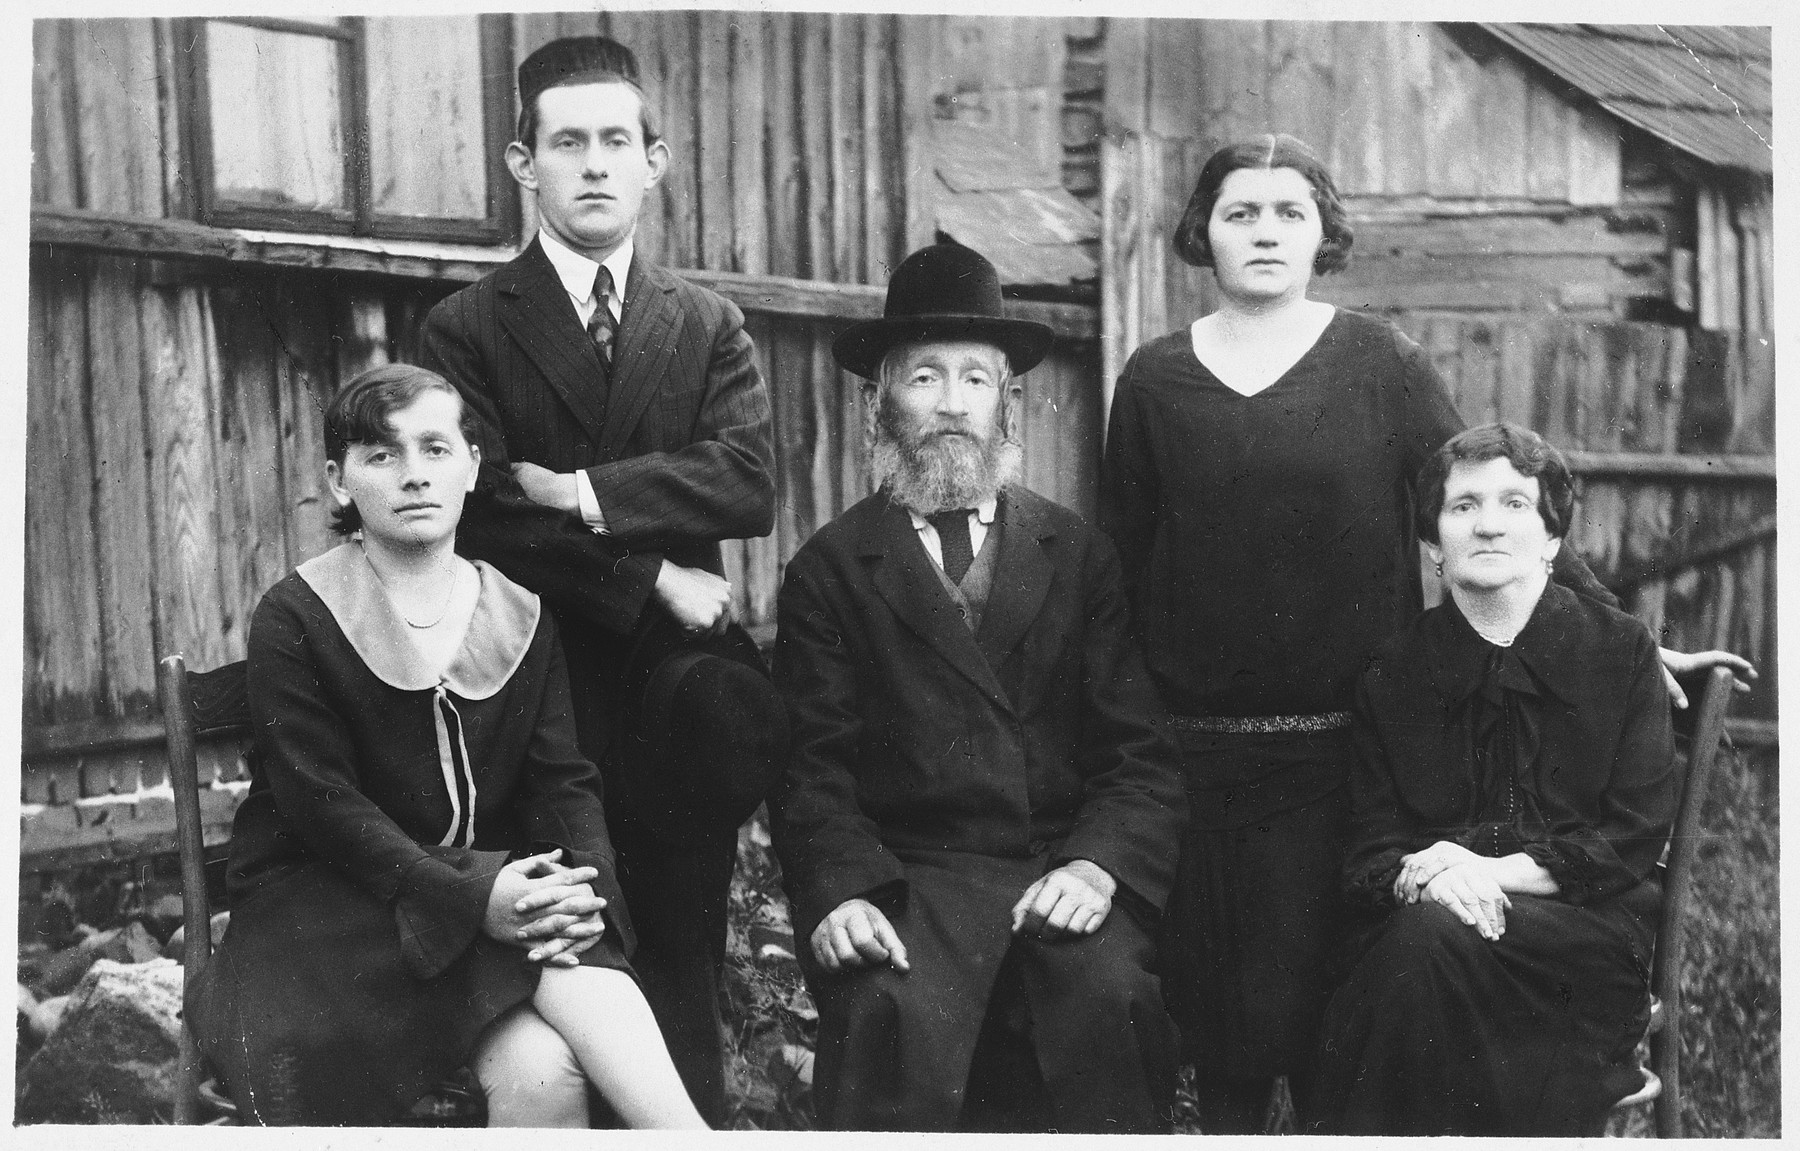 Members of a Jewish family pose outside in Kolbuszowa.

Pictured are Hersh (Sonel) Yaacov and Dobe (Mania) Kornbluth Silber (seated on the right) with their children, Rachel (seated front, left), Mosyc Aaron, and Bracha (standing in back).